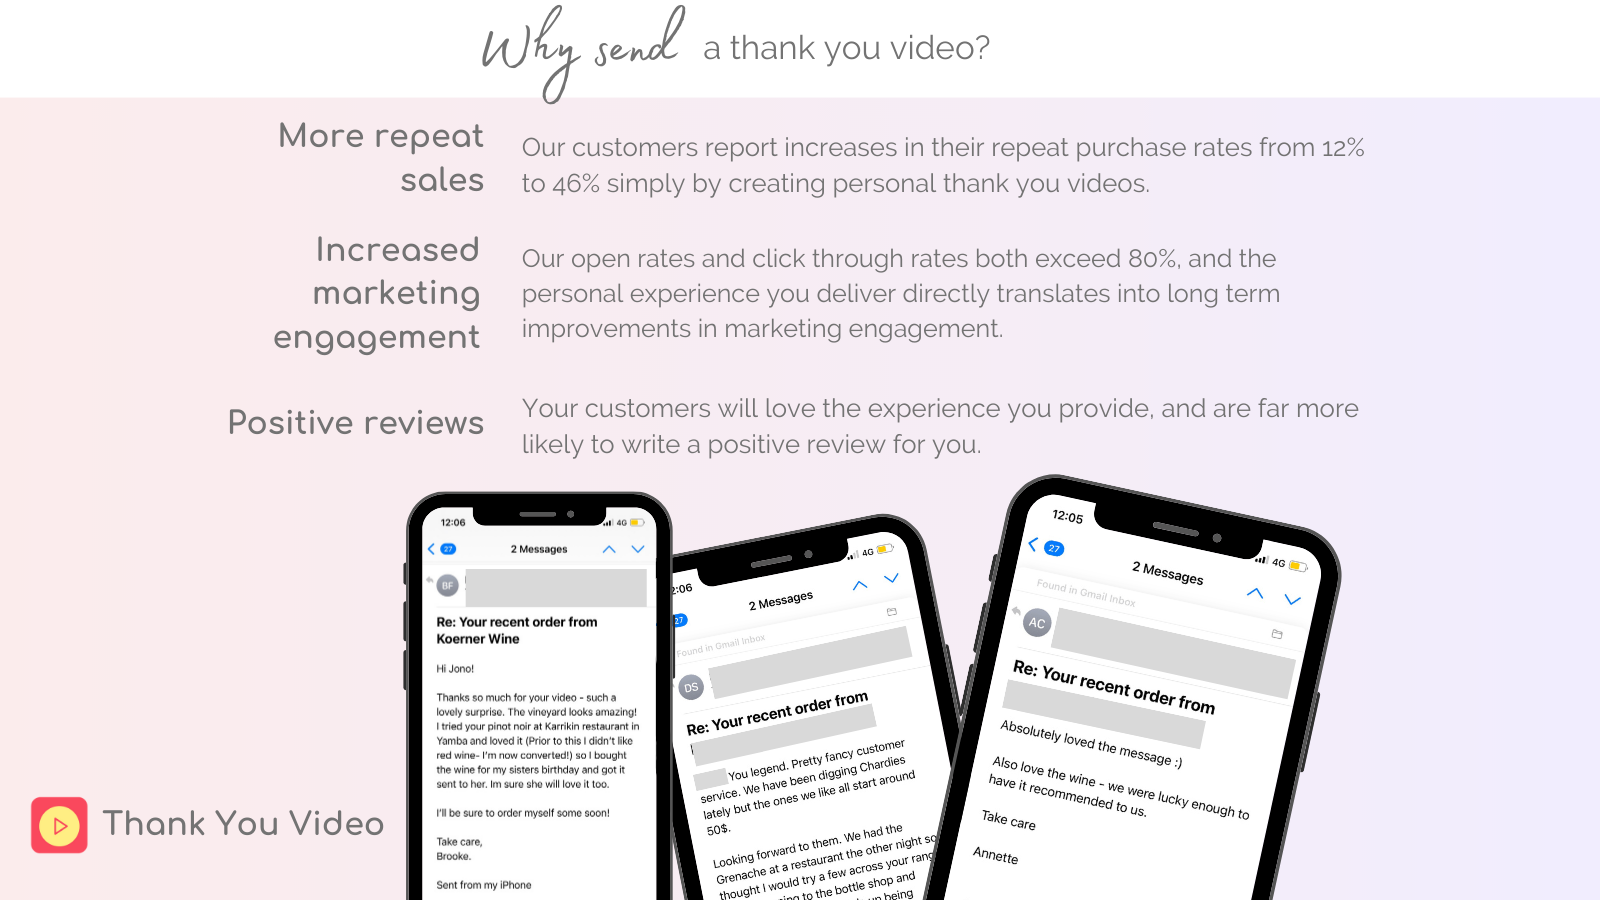 Why send a thank you video?